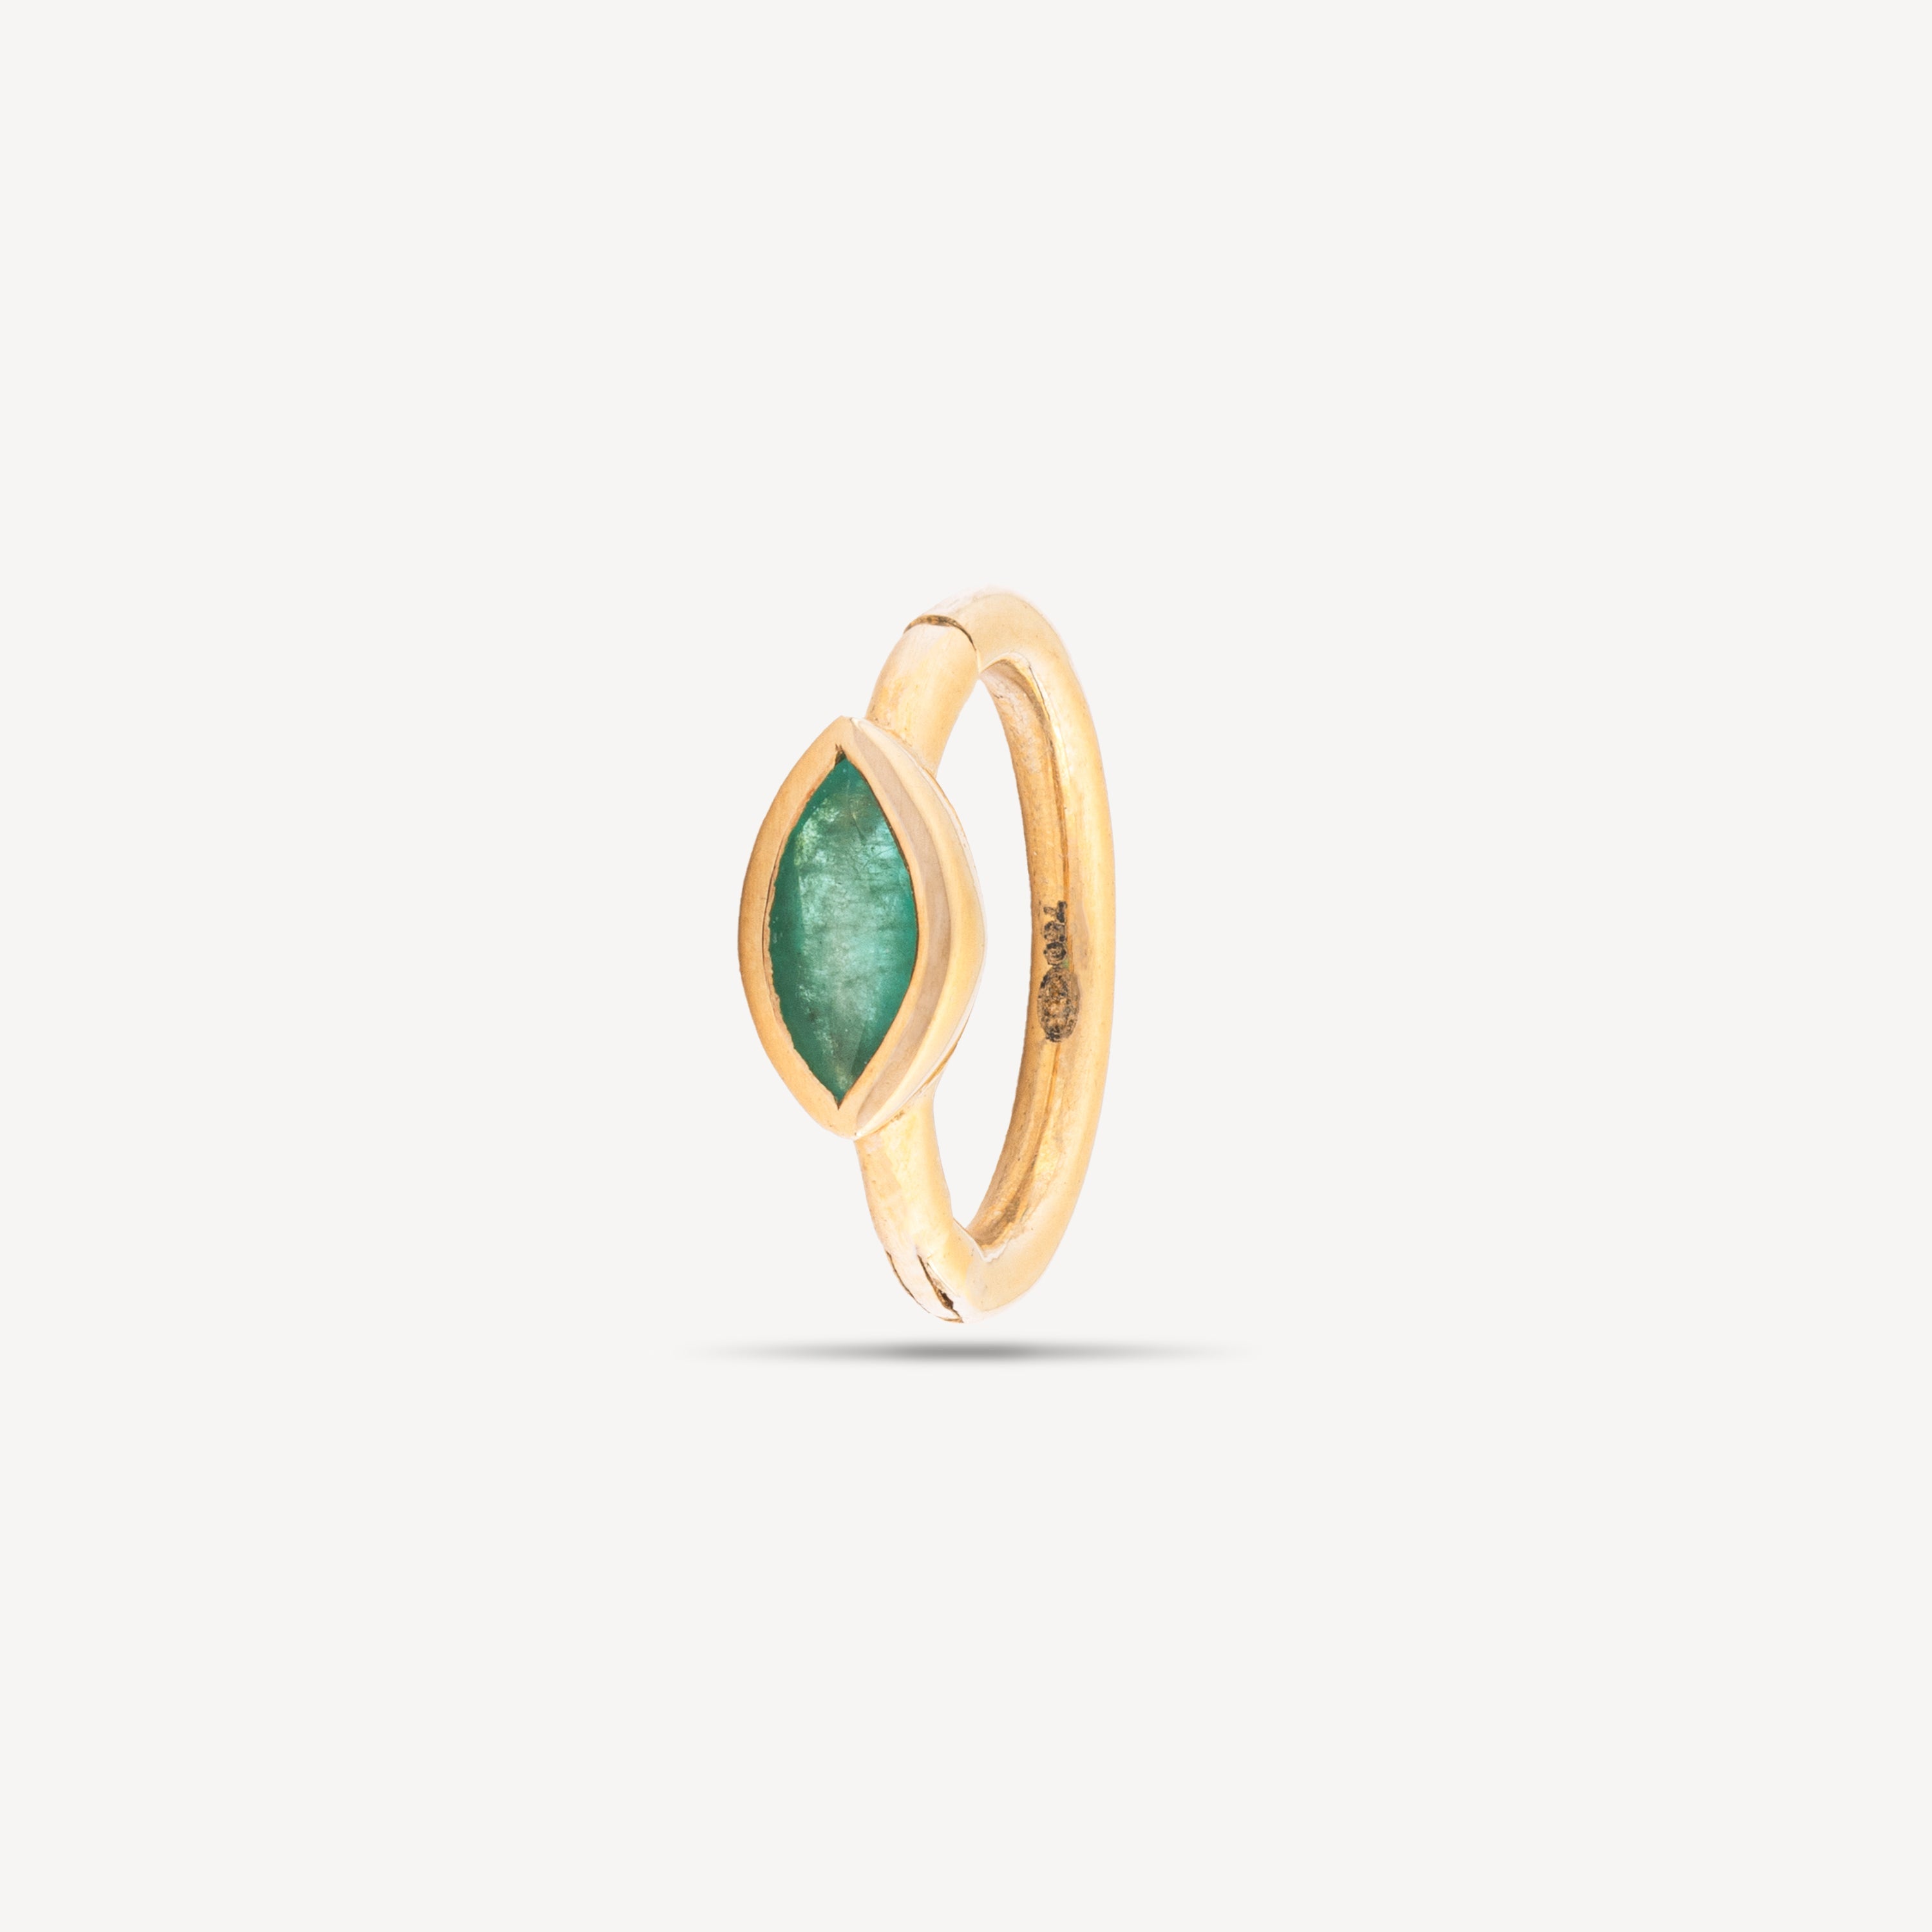 Yellow gold 3x2mm marquise emerald 6.5mm hoop